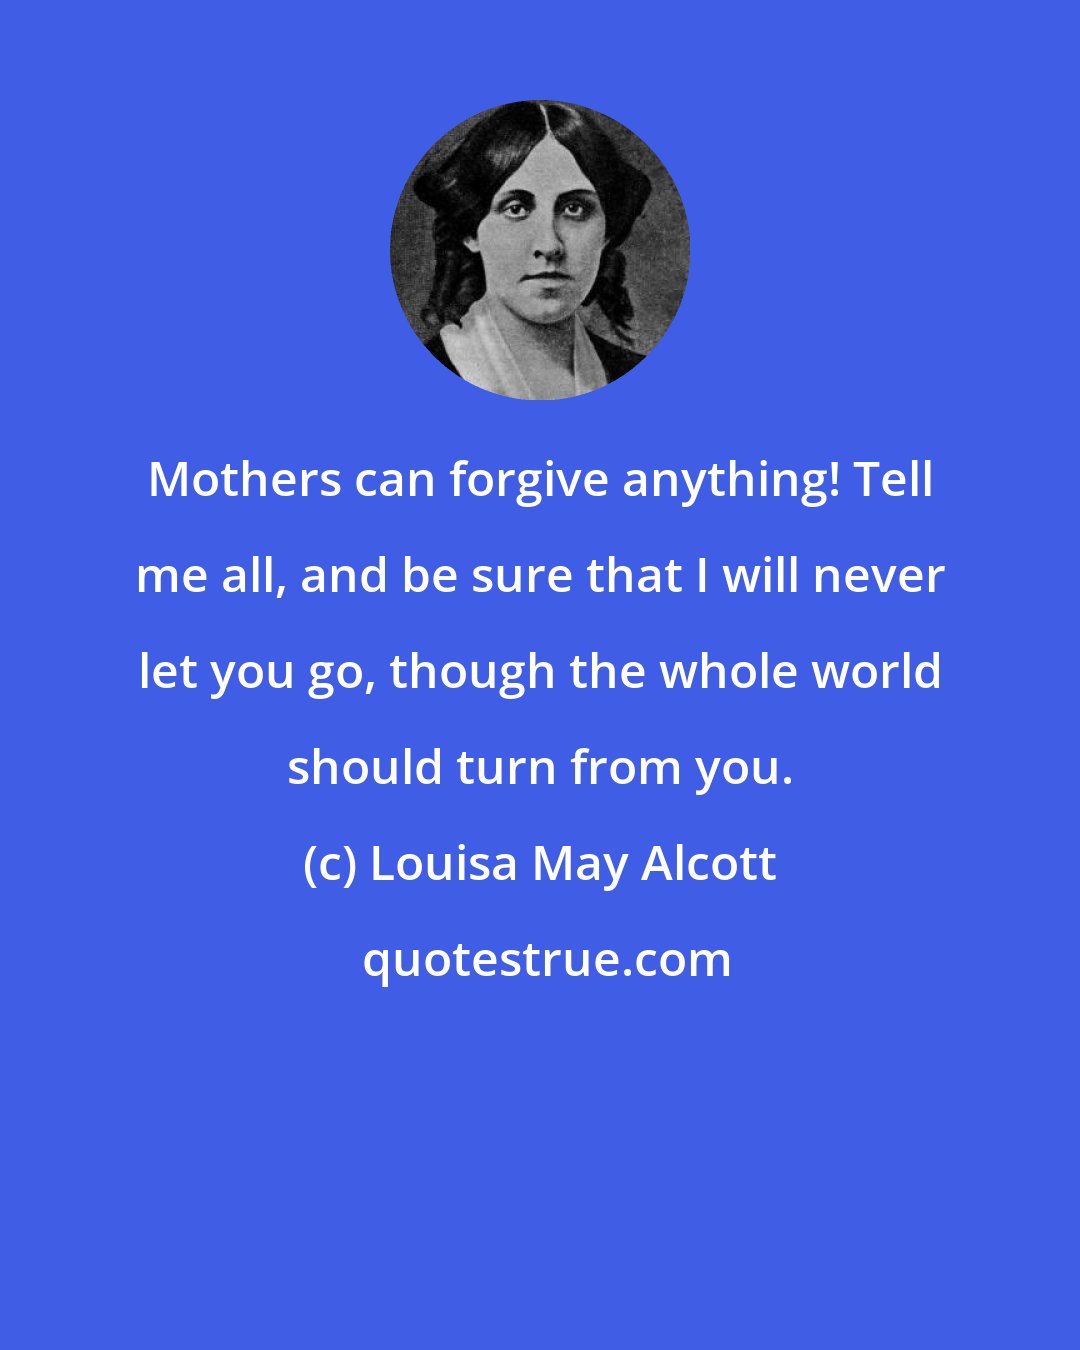 Louisa May Alcott: Mothers can forgive anything! Tell me all, and be sure that I will never let you go, though the whole world should turn from you.